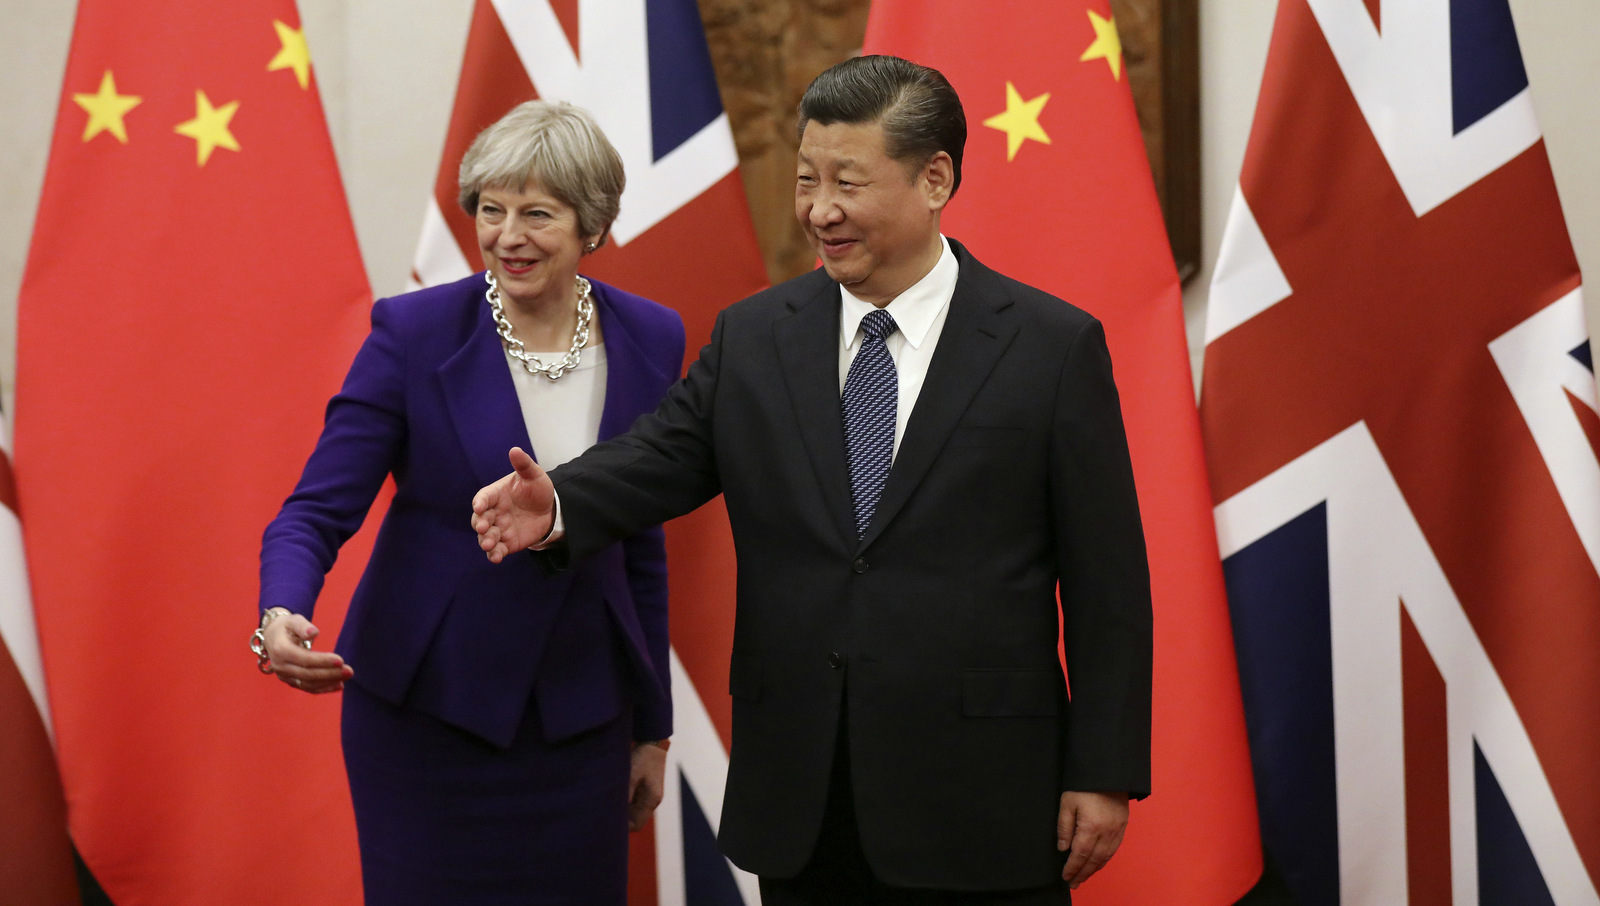 Chinese President Xi Jinping, right, and British Prime Minister Theresa May gesture ahead a meeting at the Diaoyutai State Guesthouse in Beijing, Feb. 1, 2018. (Wu Hong/AP)